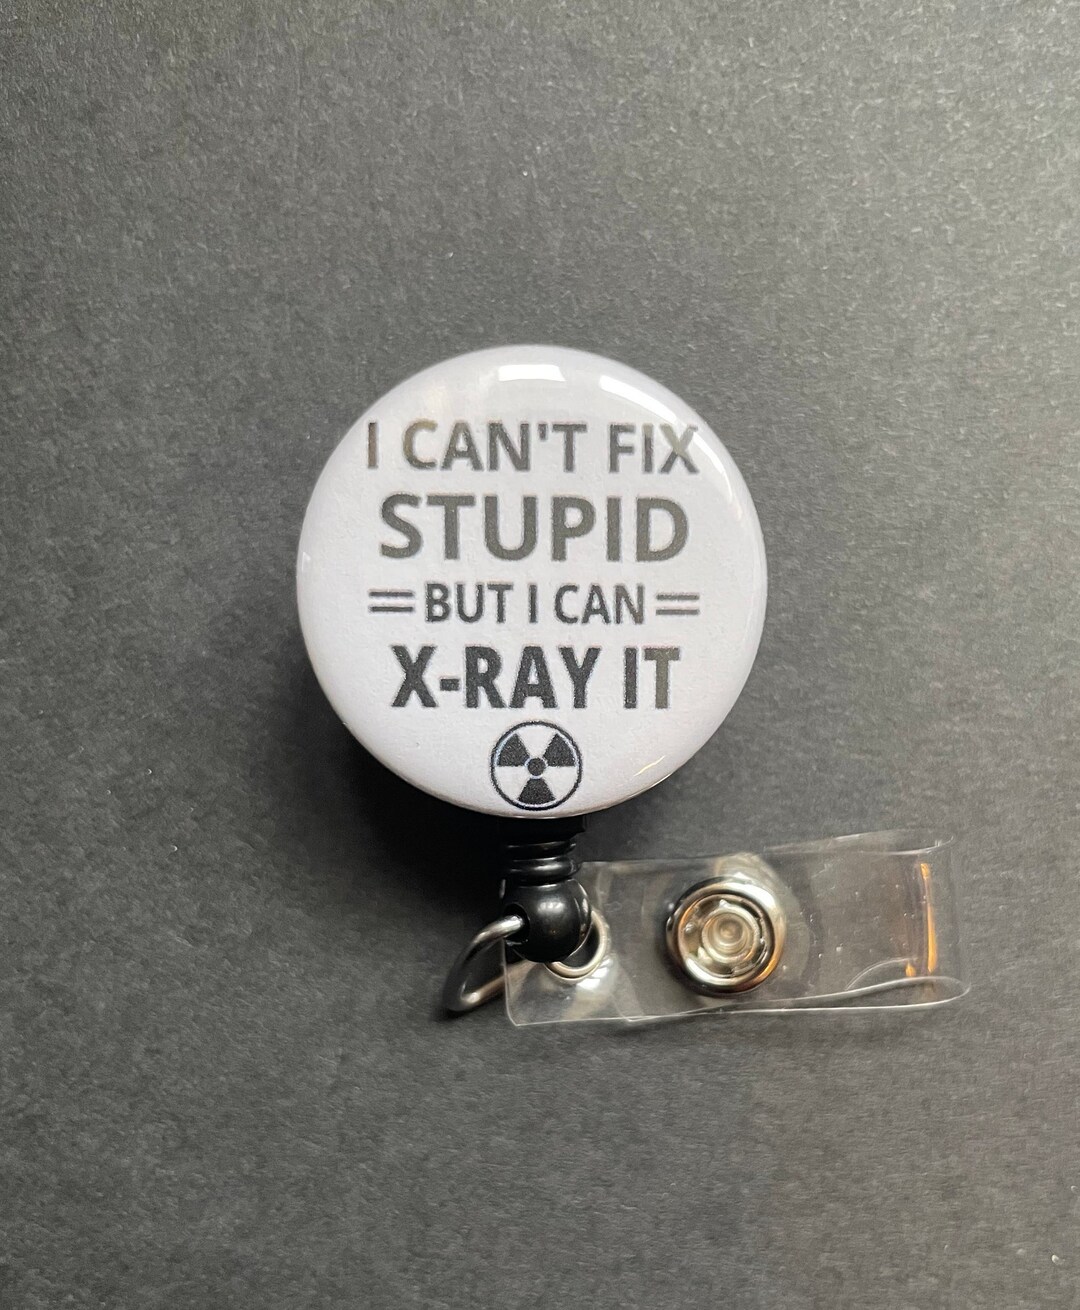 Buy Funny Xray Badge Reel, I Can't Fix Stupid but I Can X-ray It